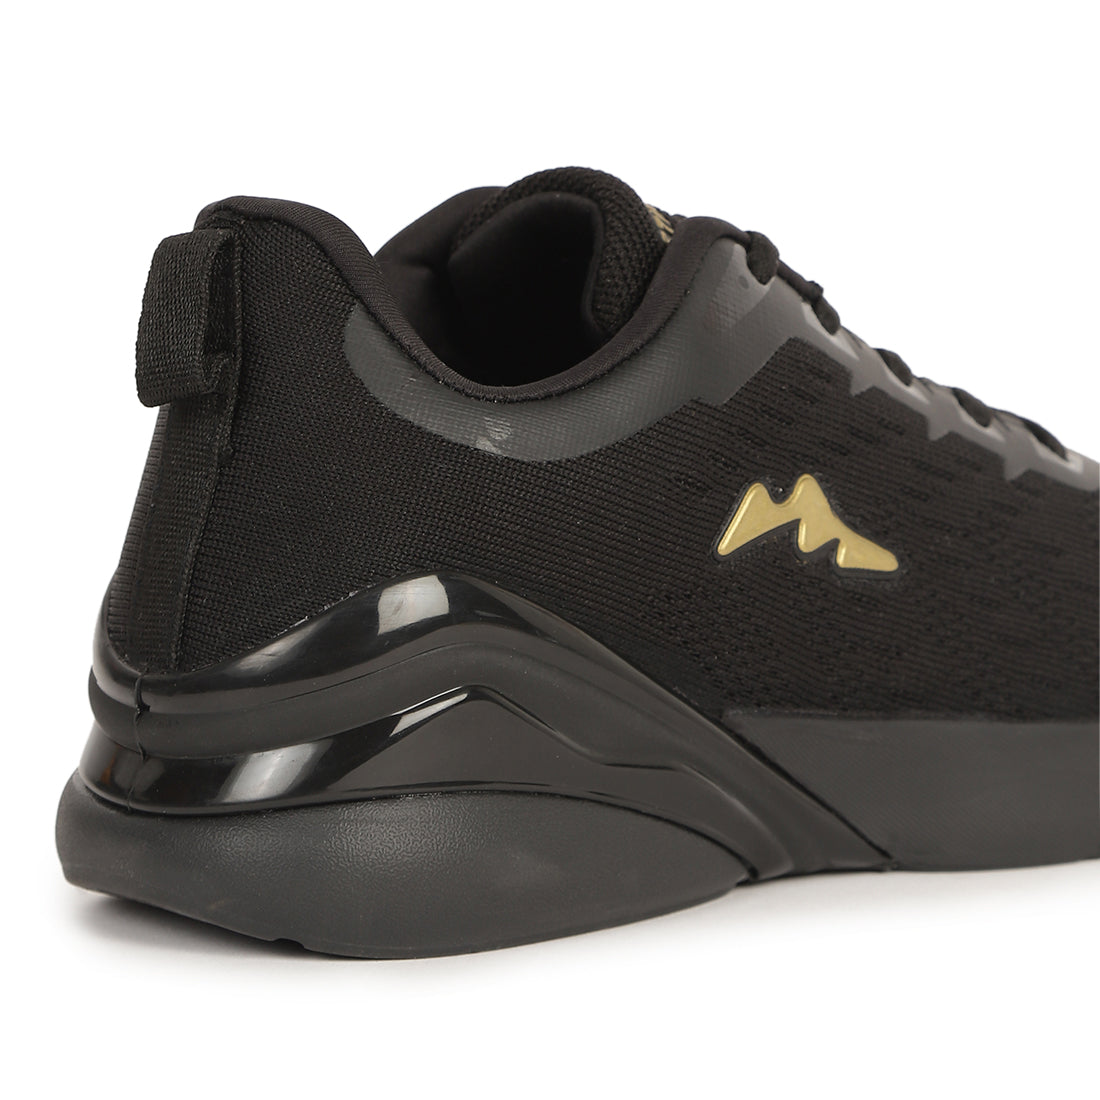 Paragon Stimulus Black and Gold Casual Running Shoes for Men